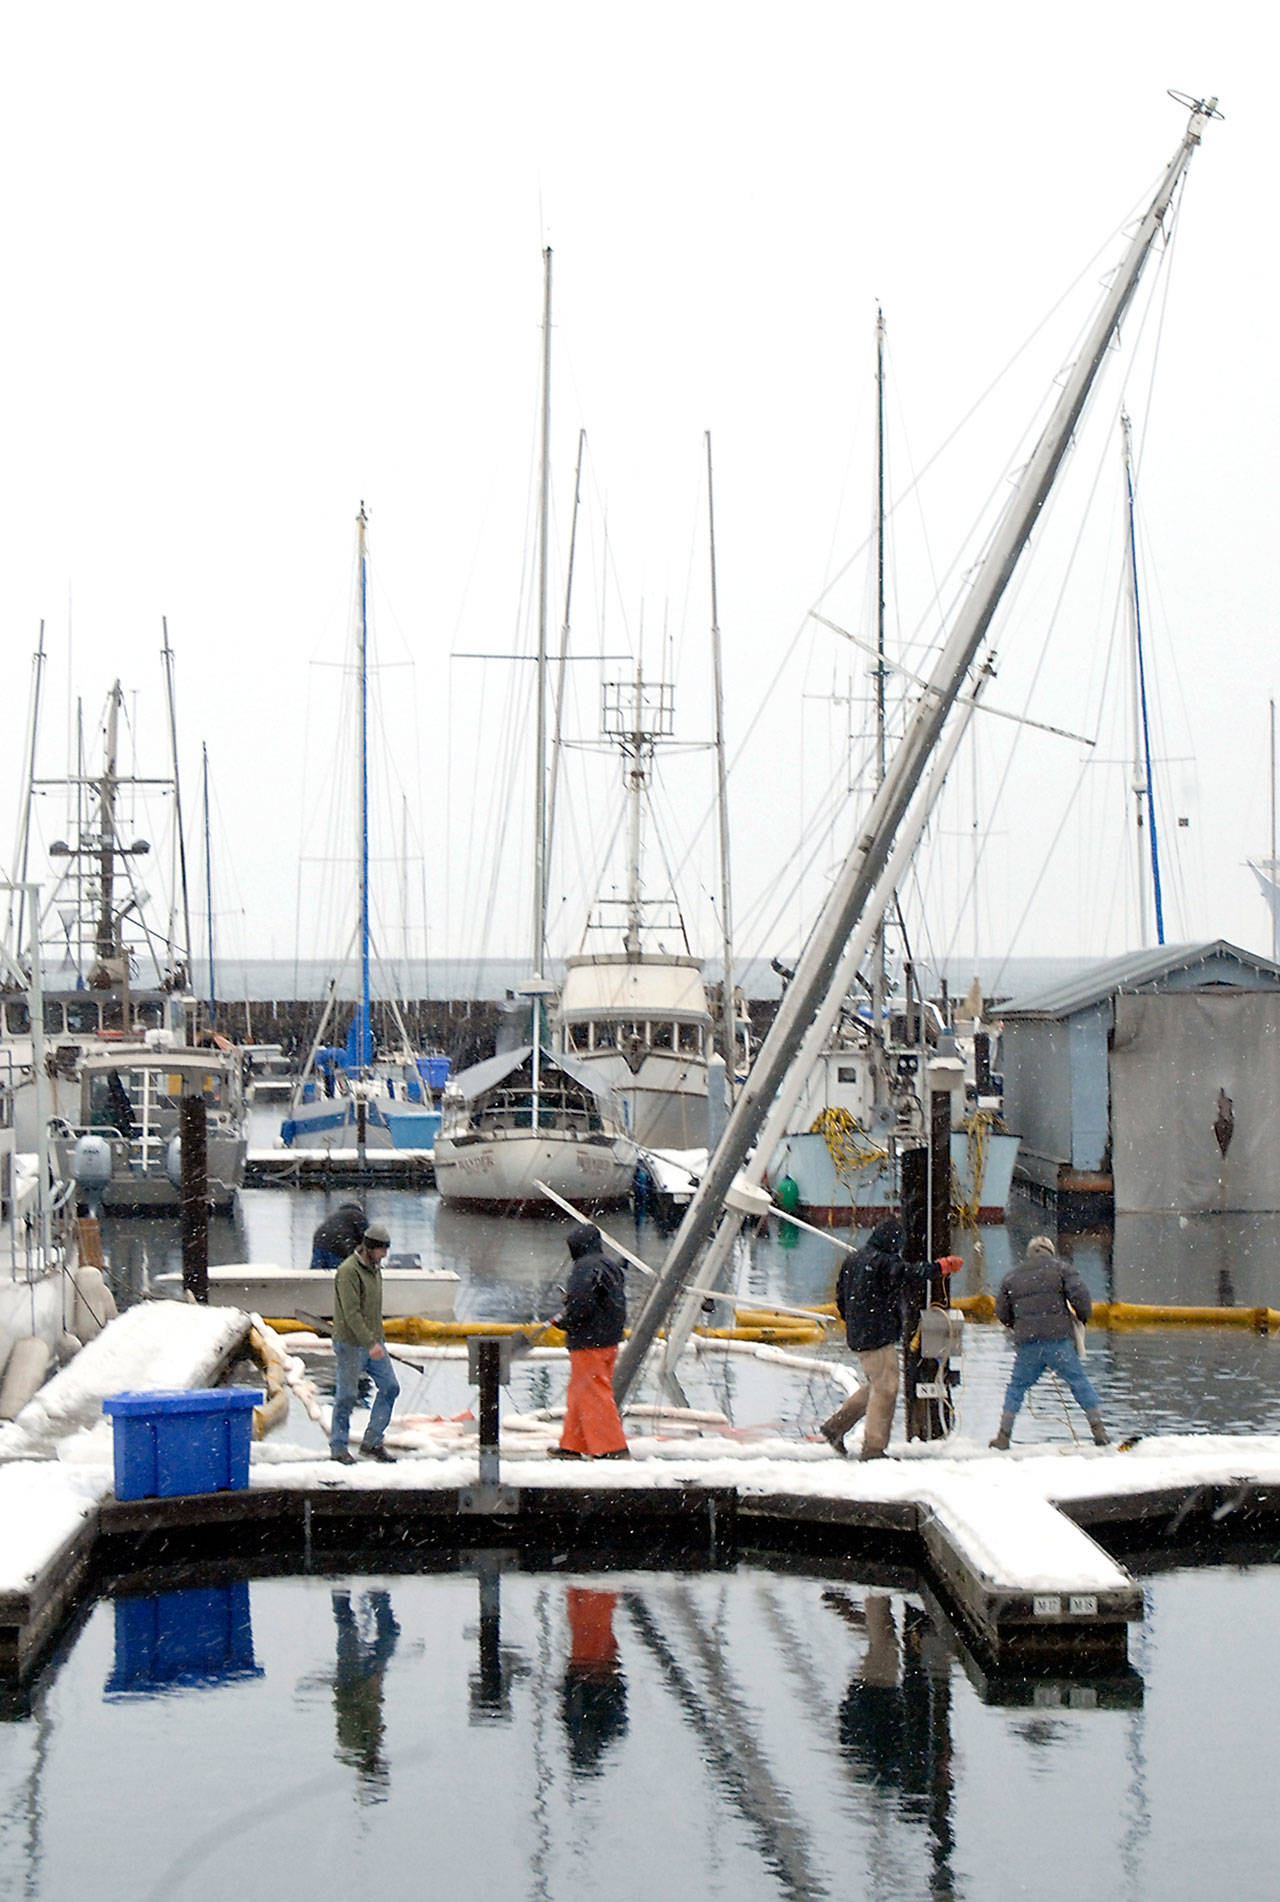 The 50-foot sailboat Fram rests on the bottom of Port Angeles Boat Haven on Wednesday morning after sinking the previous night. (Keith Thorpe/Peninsula Daily News)